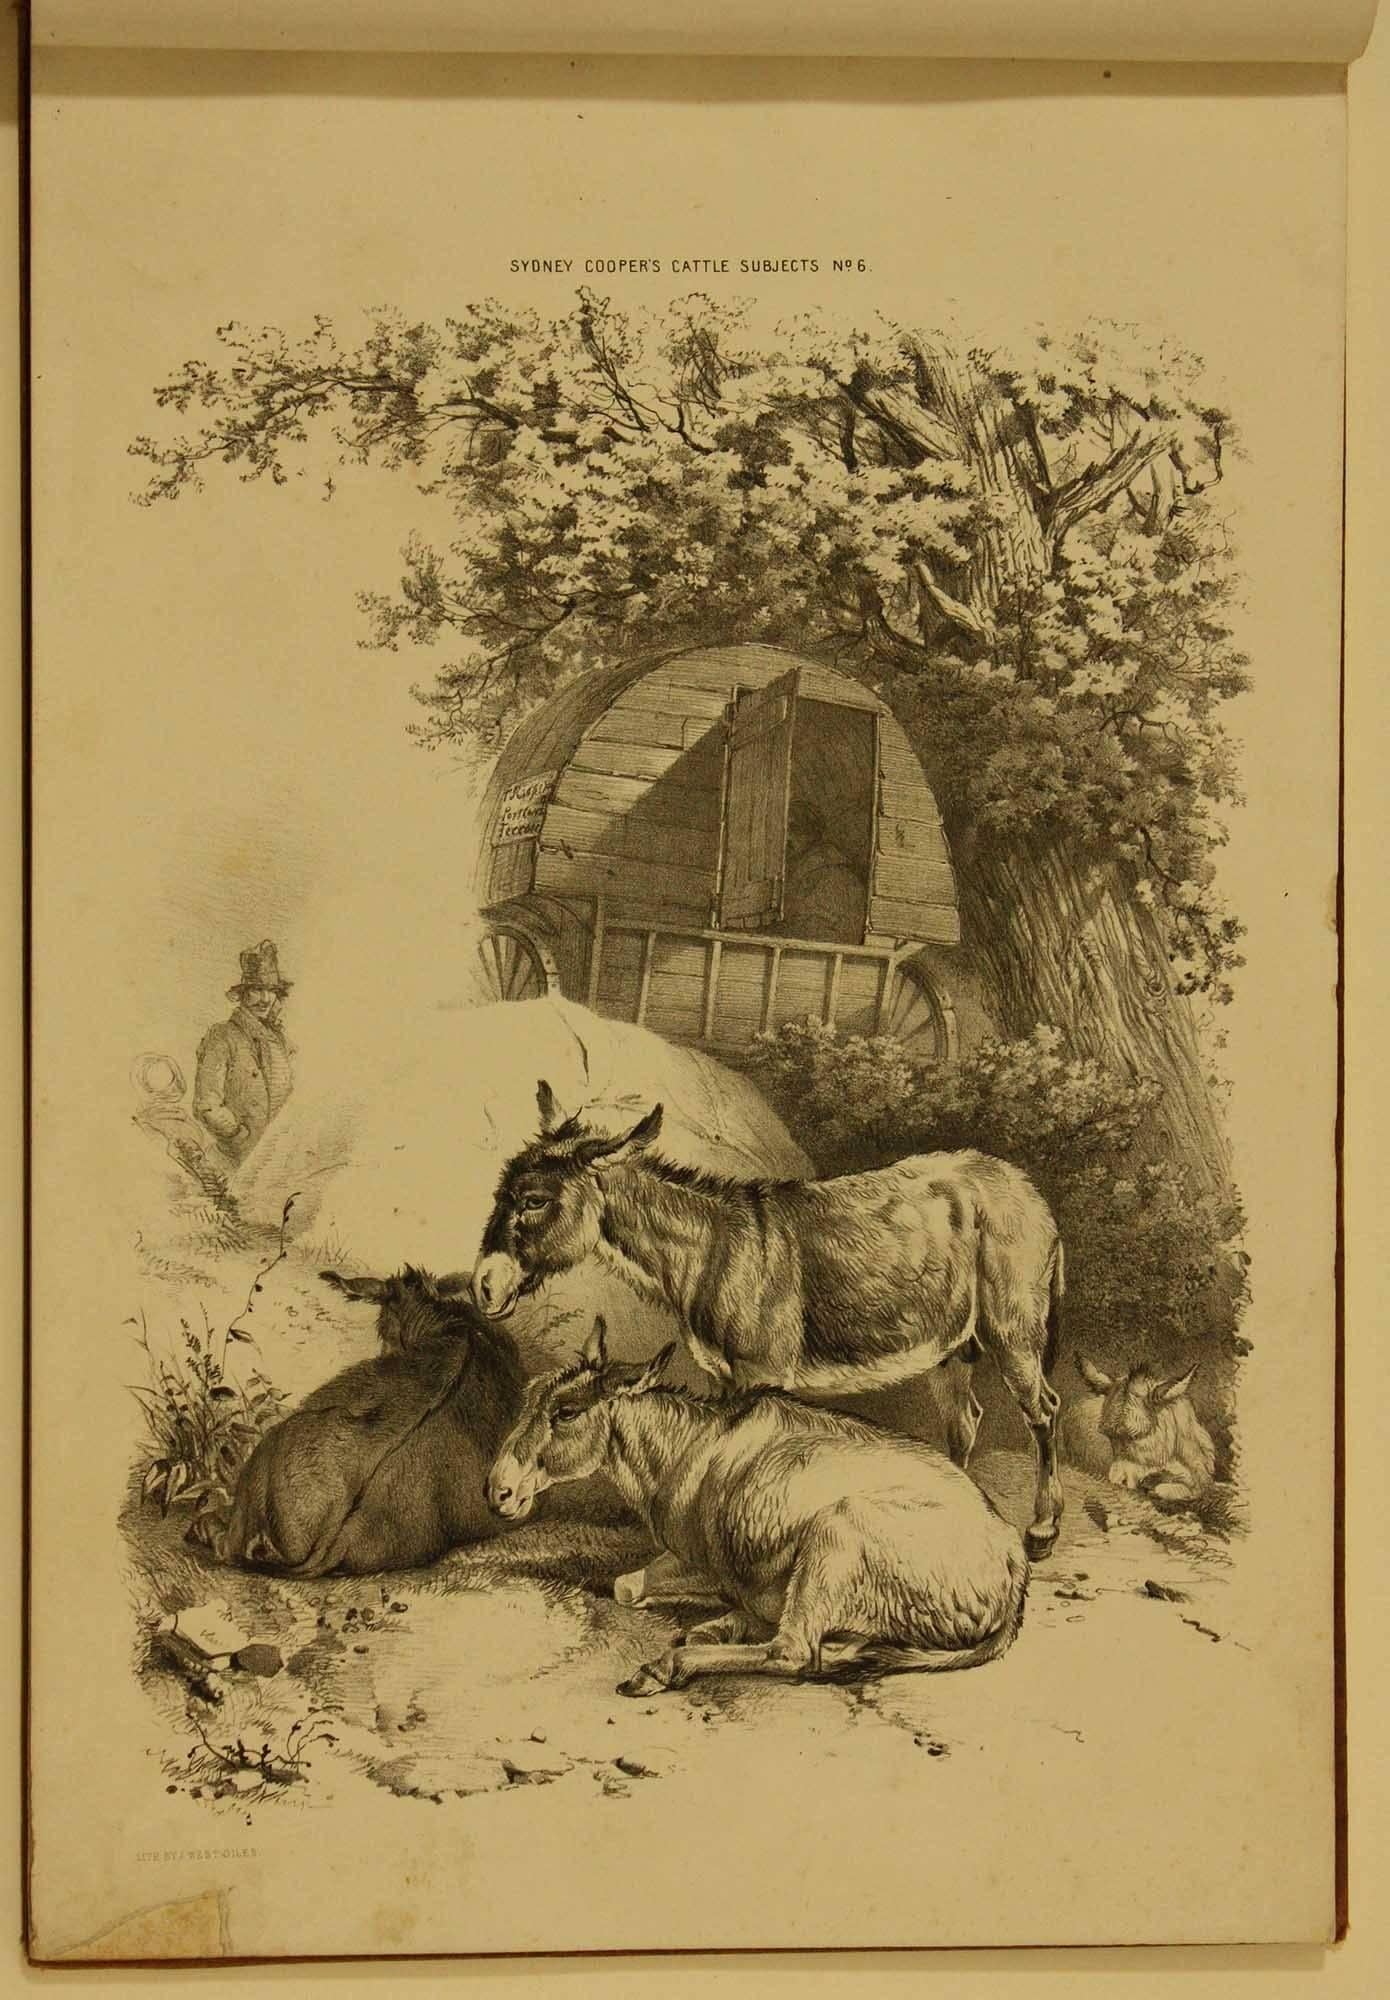 COOPER, Thomas Sidney  Groups of Cattle, Drawn from Nature Book 1839 London - Print by Thomas Sidney Cooper